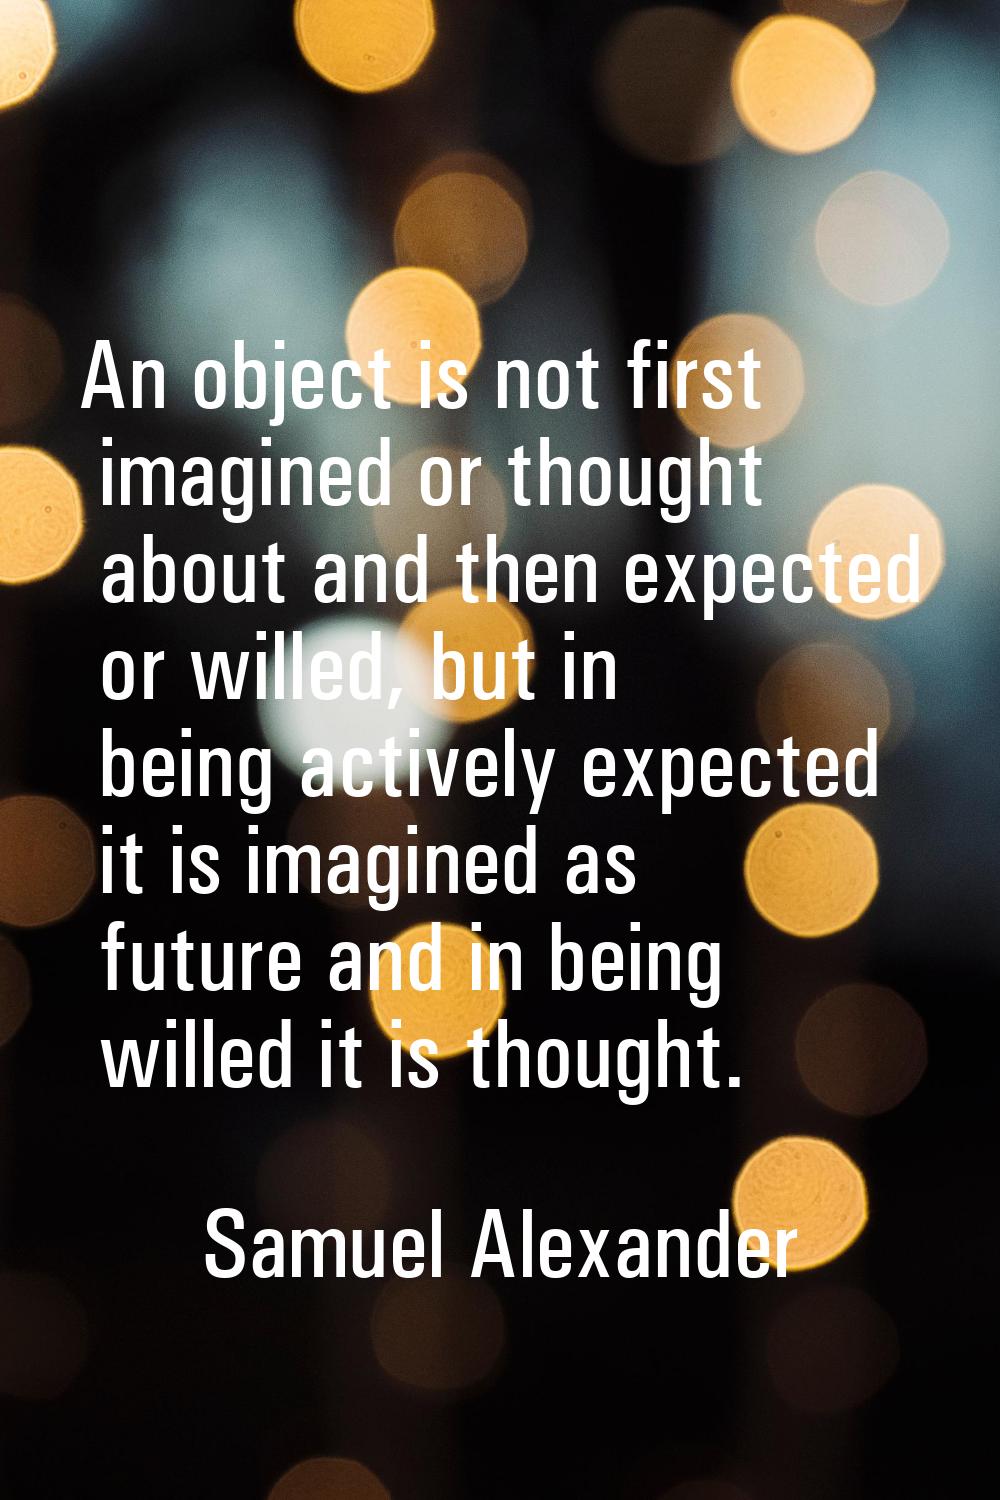 An object is not first imagined or thought about and then expected or willed, but in being actively